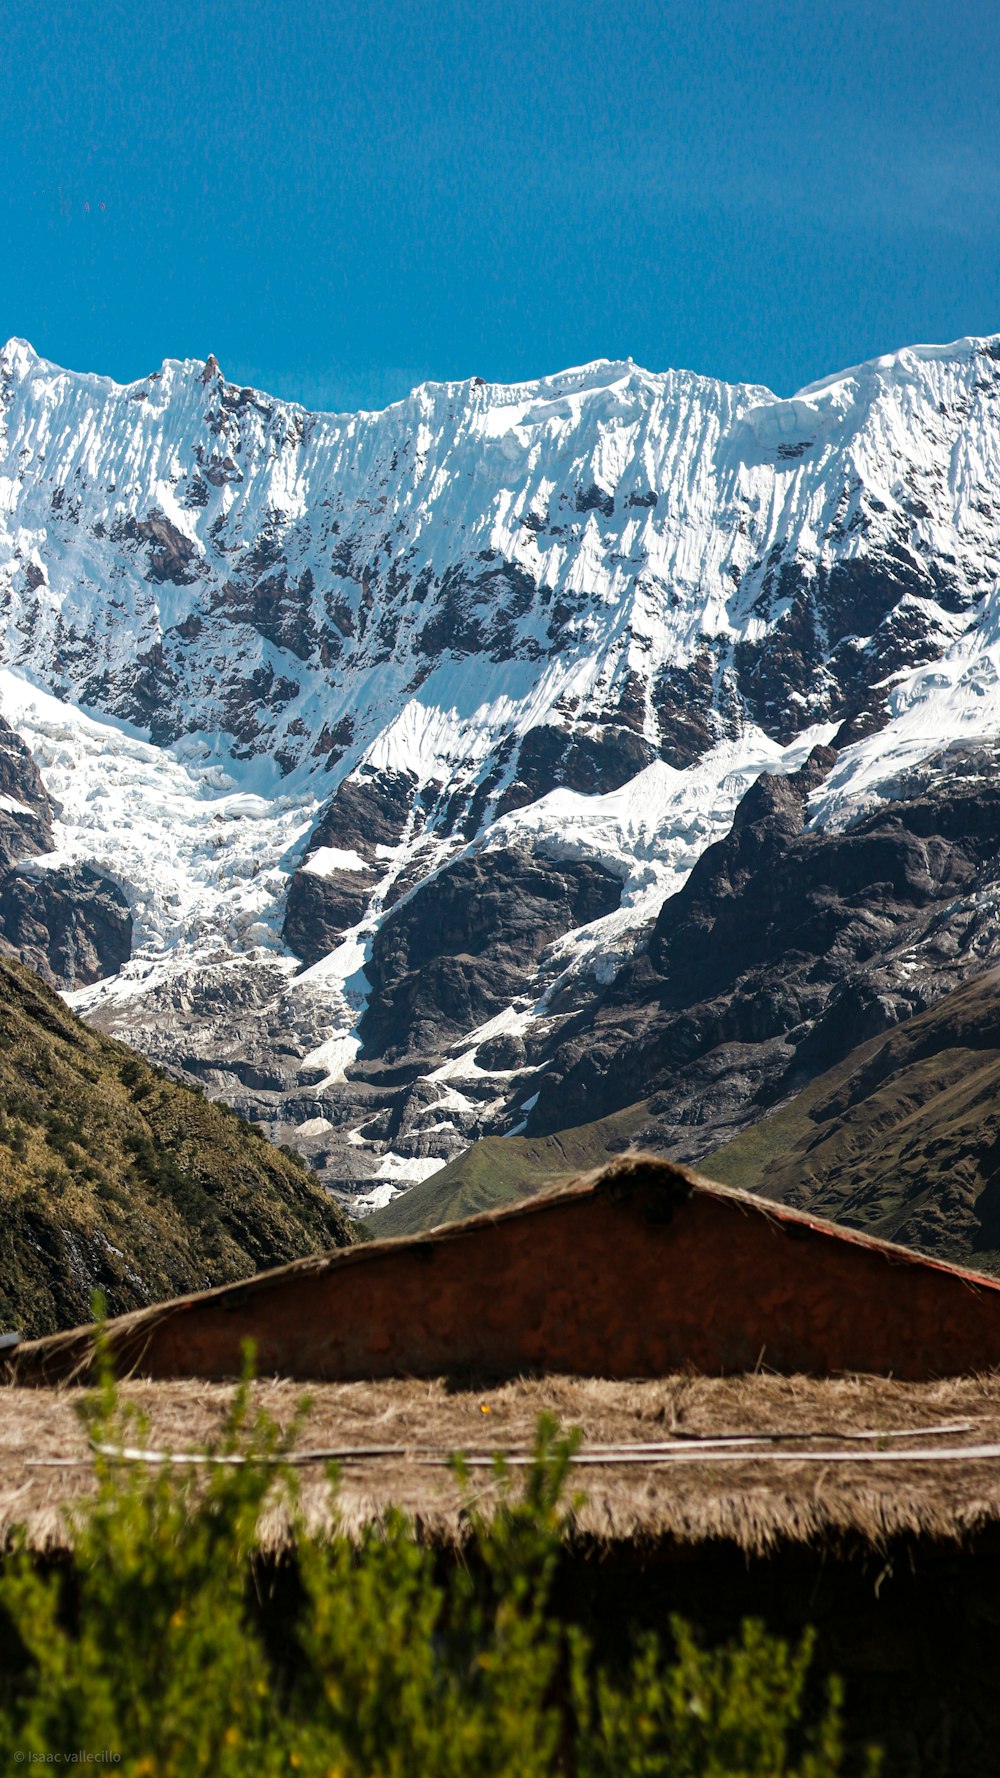 a view of a snowy mountain range with a hut in the foreground